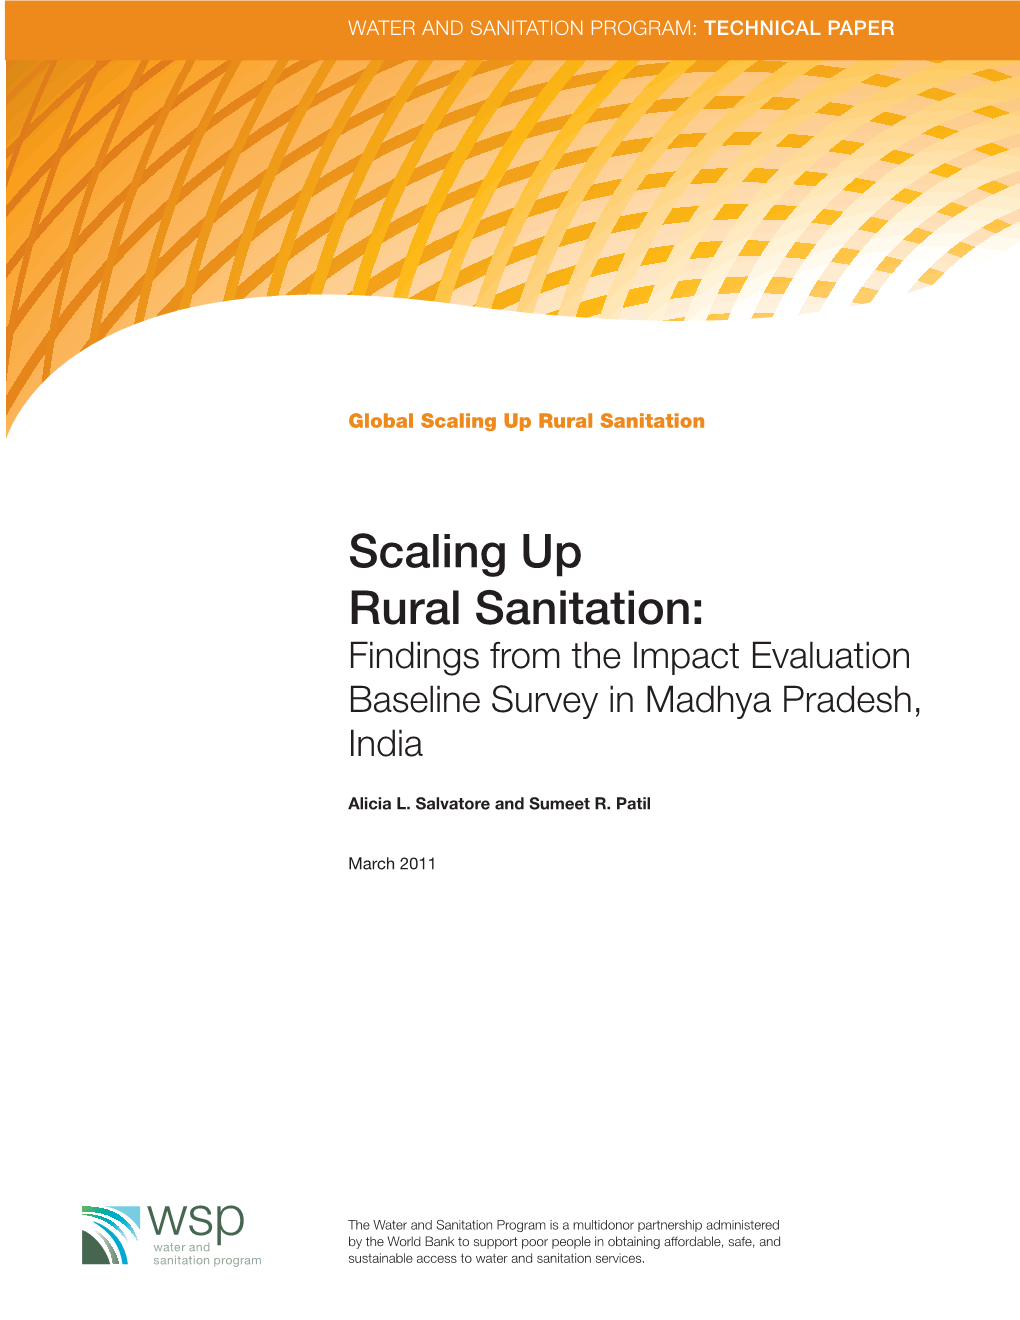 Findings from the Impact Evaluation Baseline Survey in Madhya Pradesh, India